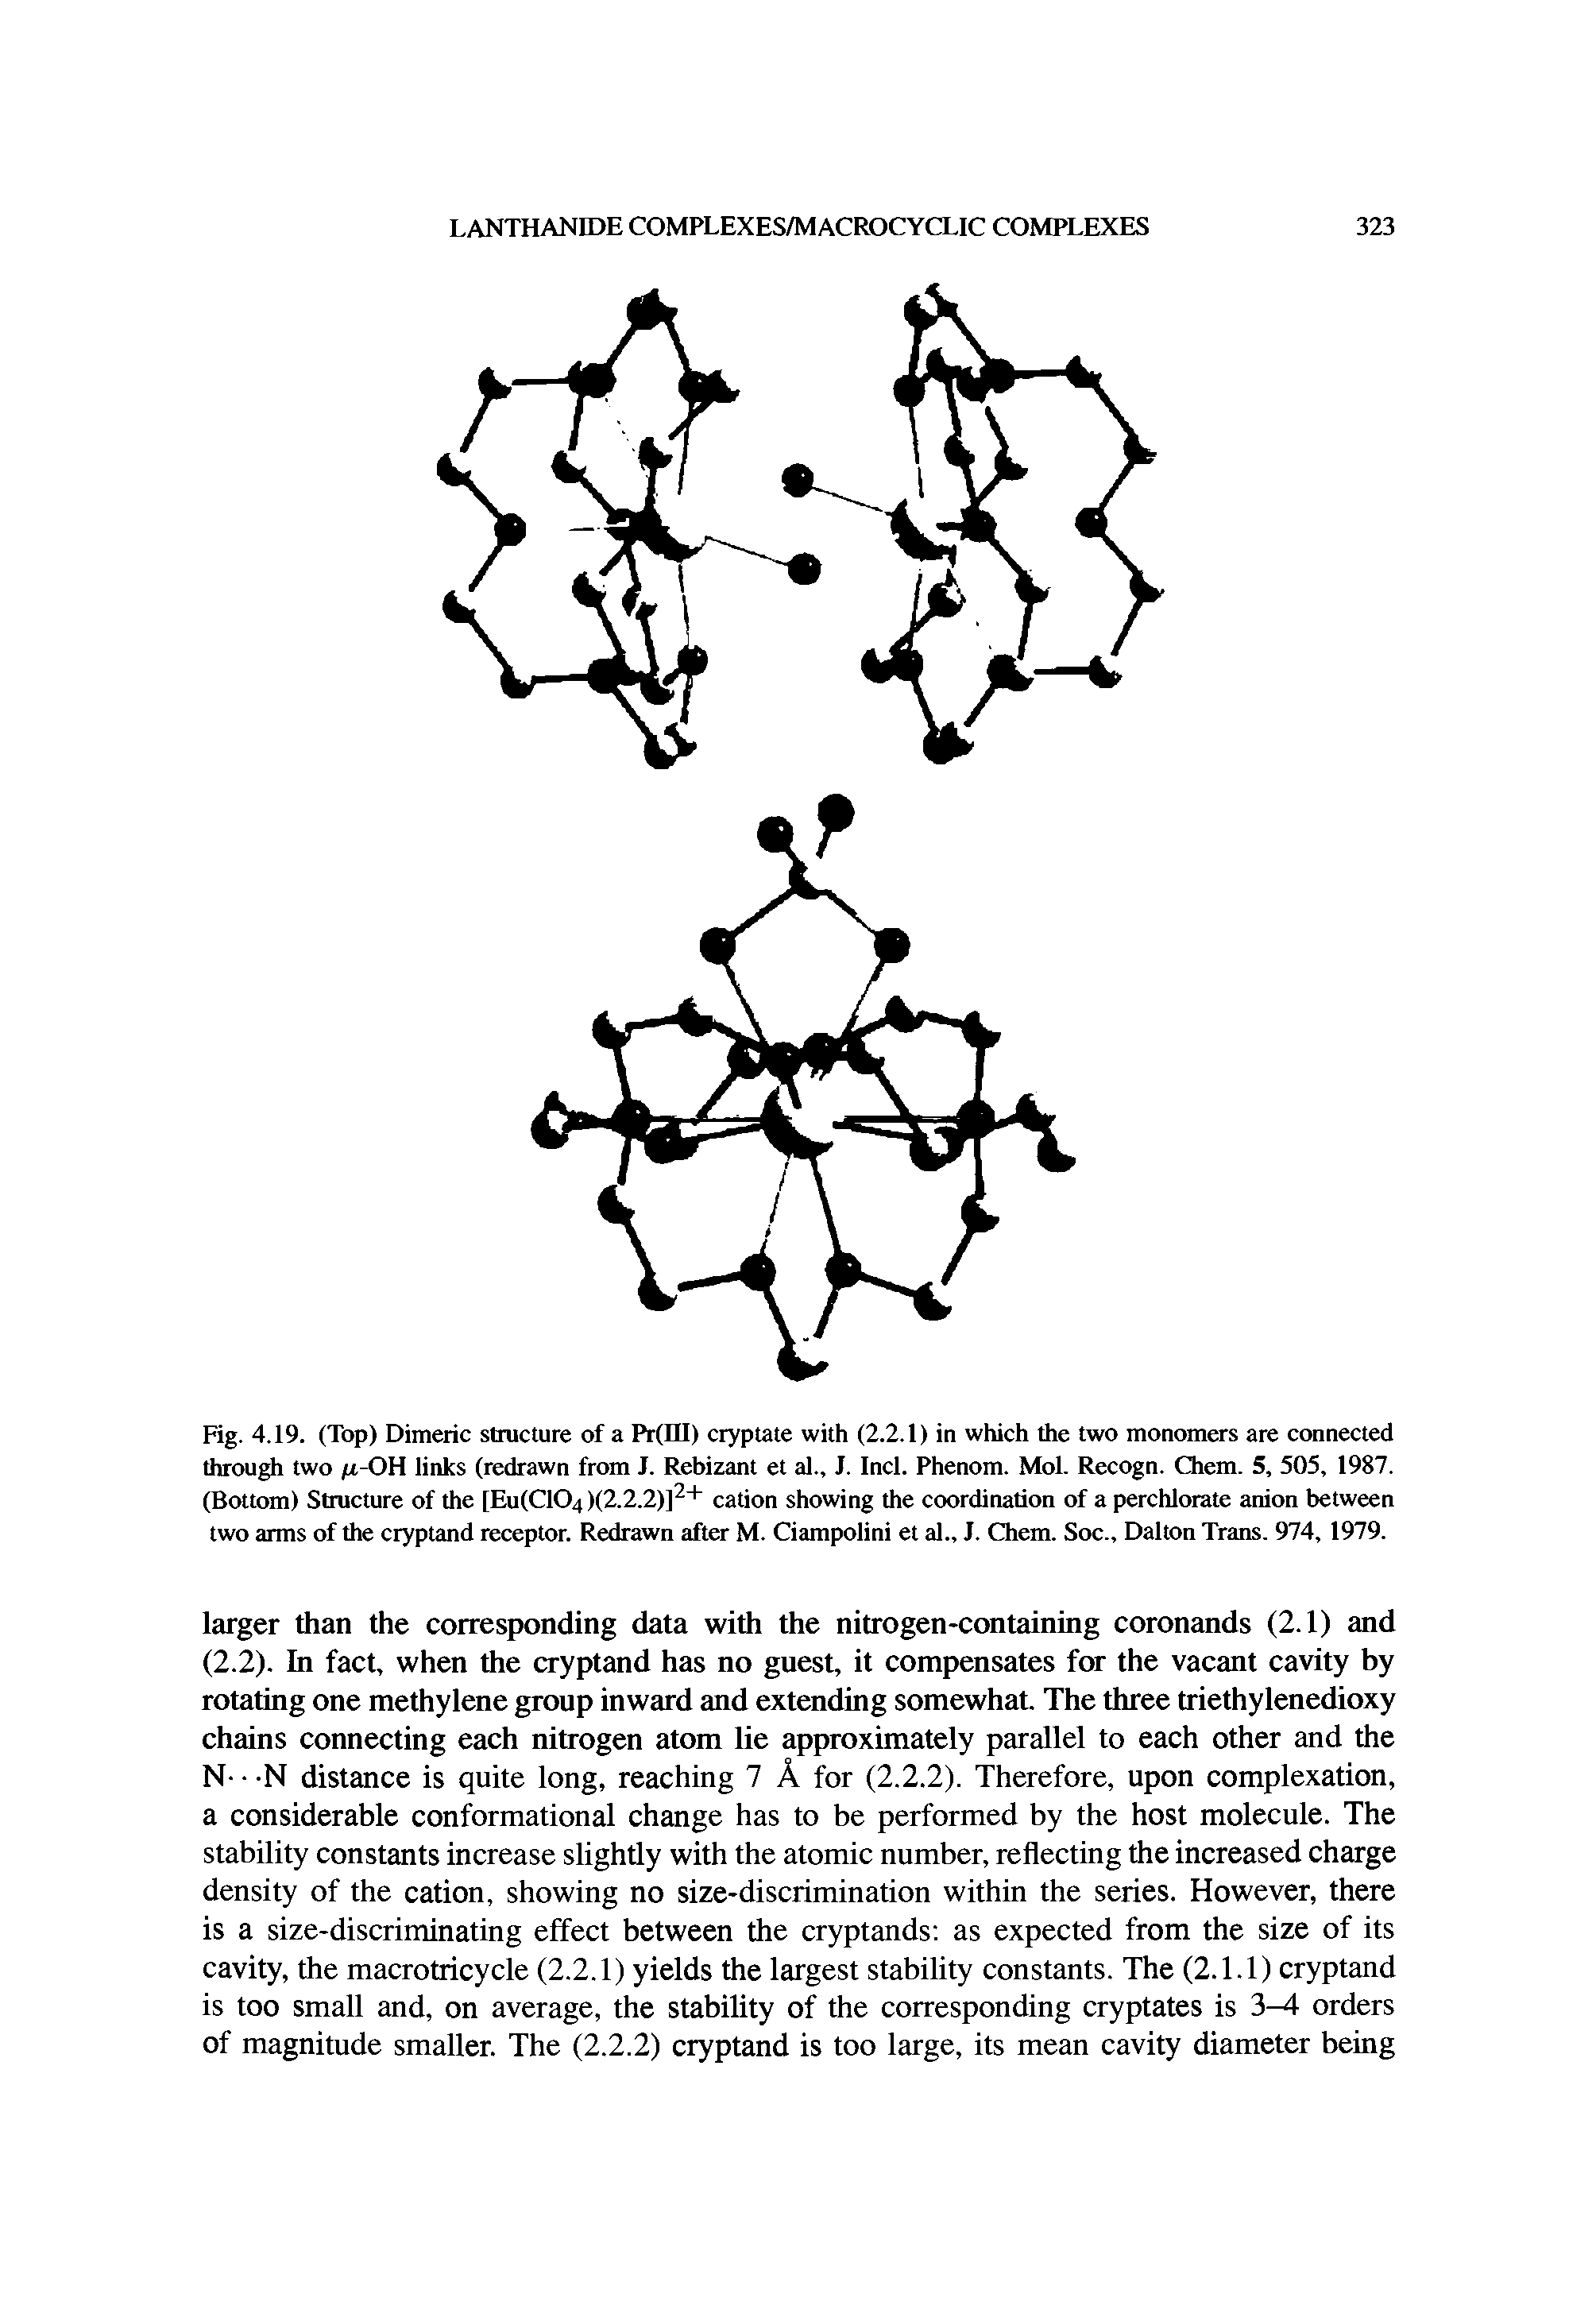 Fig. 4.19. (Top) Dimeric structure of a Pr(III) cryptate with (2.2.1) in which the two monomers are connected through two /r-OH links (redrawn from J. Rebizant et al., J. Incl. Phenom. Mol. Recogn. Chem. 5, 505, 1987. (Bottom) Structure of the [Eu(C104 )(2.2.2)]2+ cation showing the coordination of a perchlorate anion between two arms of the cryptand receptor. Redrawn after M. Ciampolini et al., J. Chem. Soc., Dalton Trans. 974, 1979.